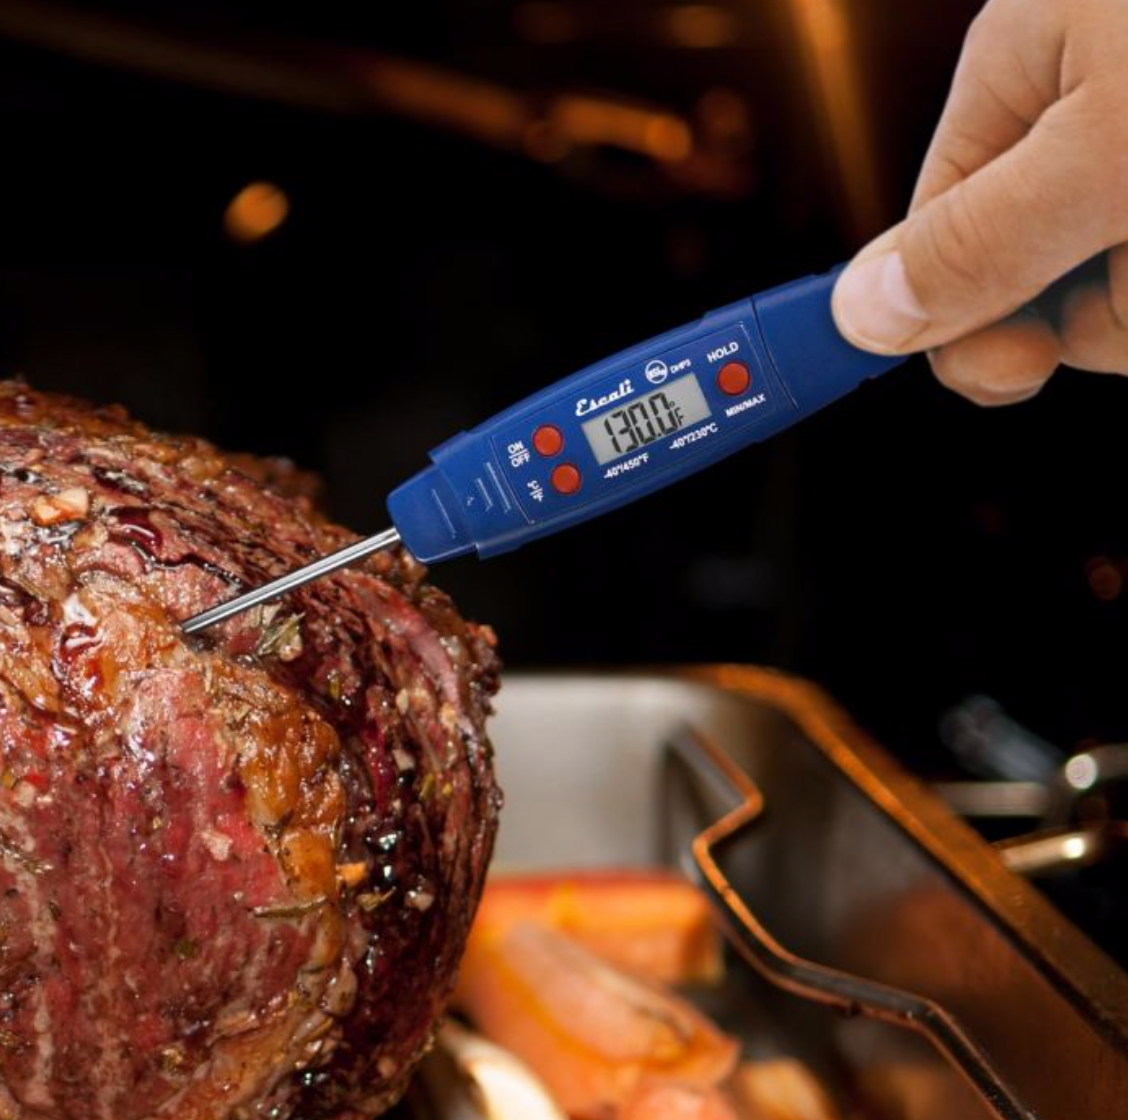 Meathead Talks: Myth: Stabbing Meat with a Thermometer, Fork, or Knife Will Drain it of Vital Juices